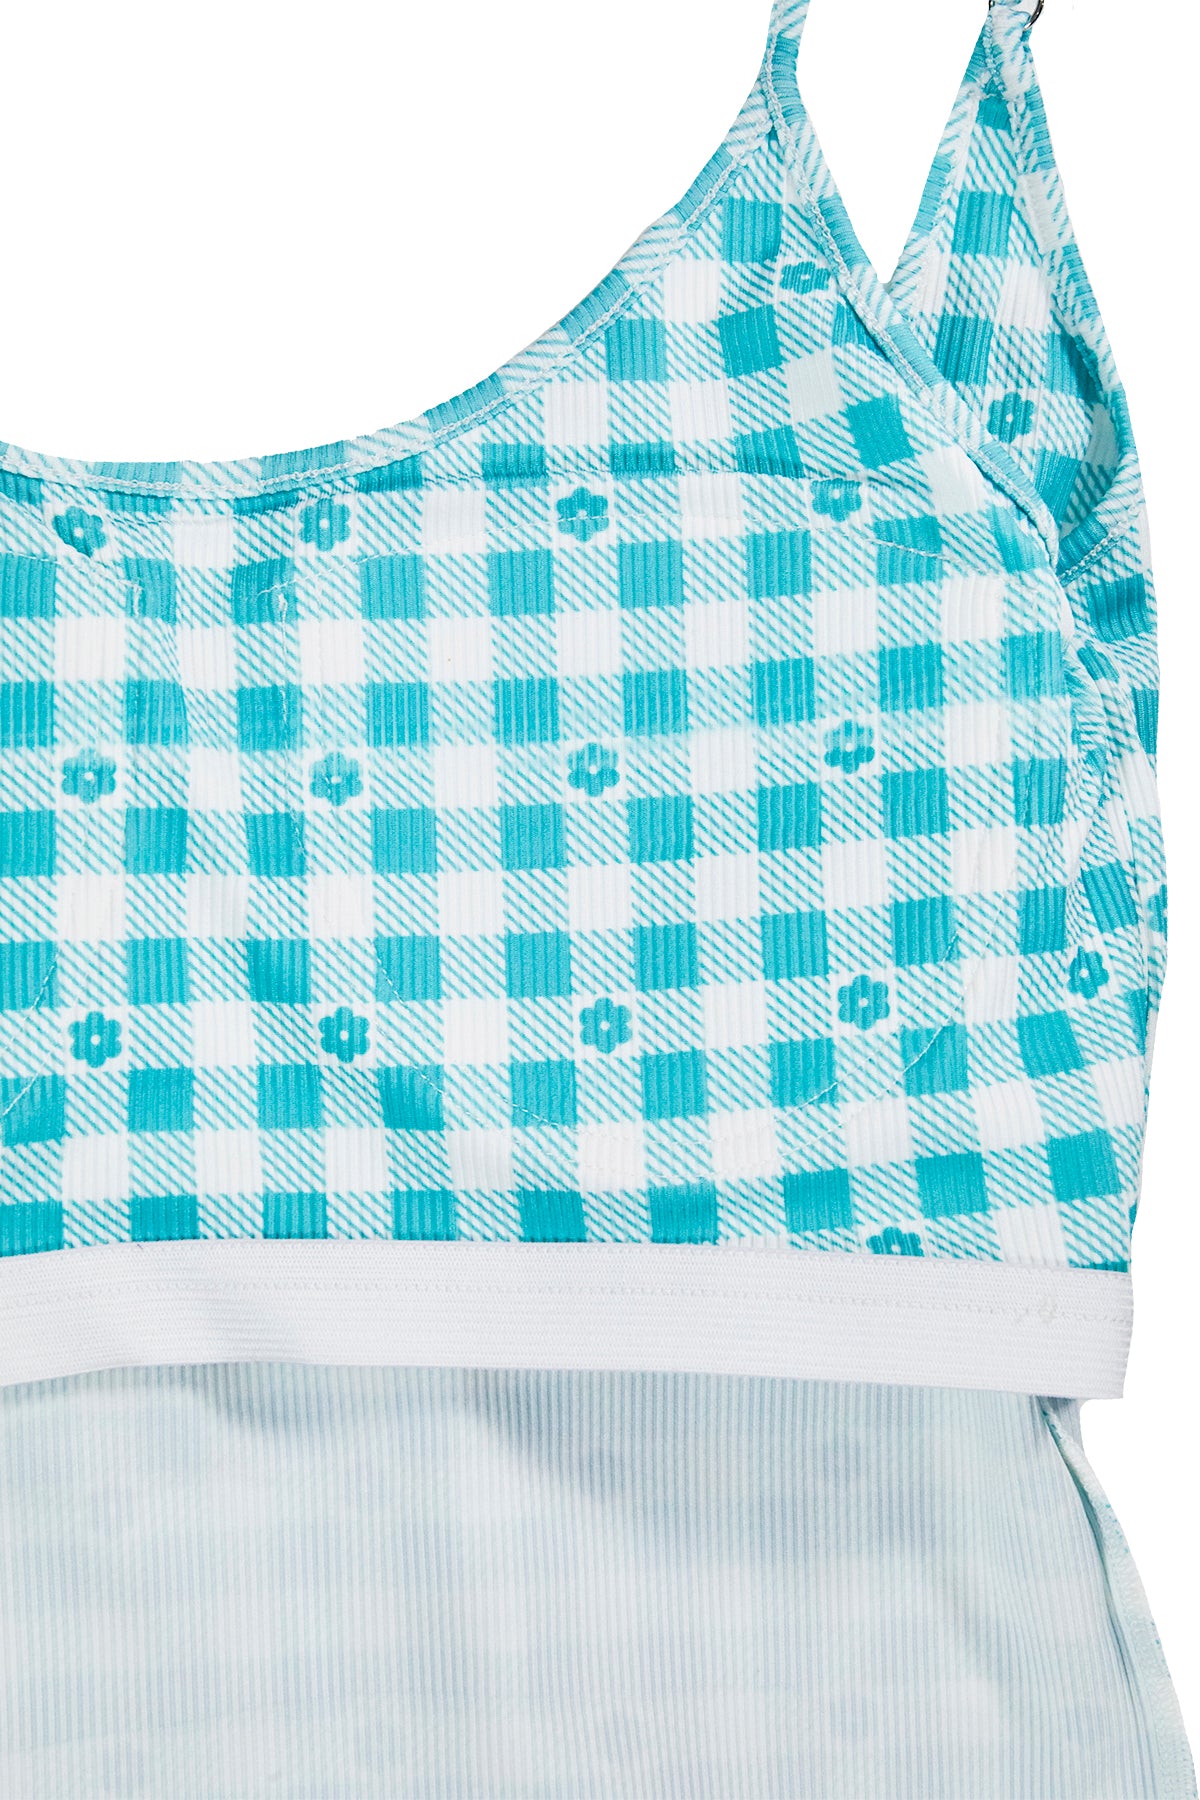 SISTERS Bra Cup Camisole（Gingham Flowers Ver.） / Blue